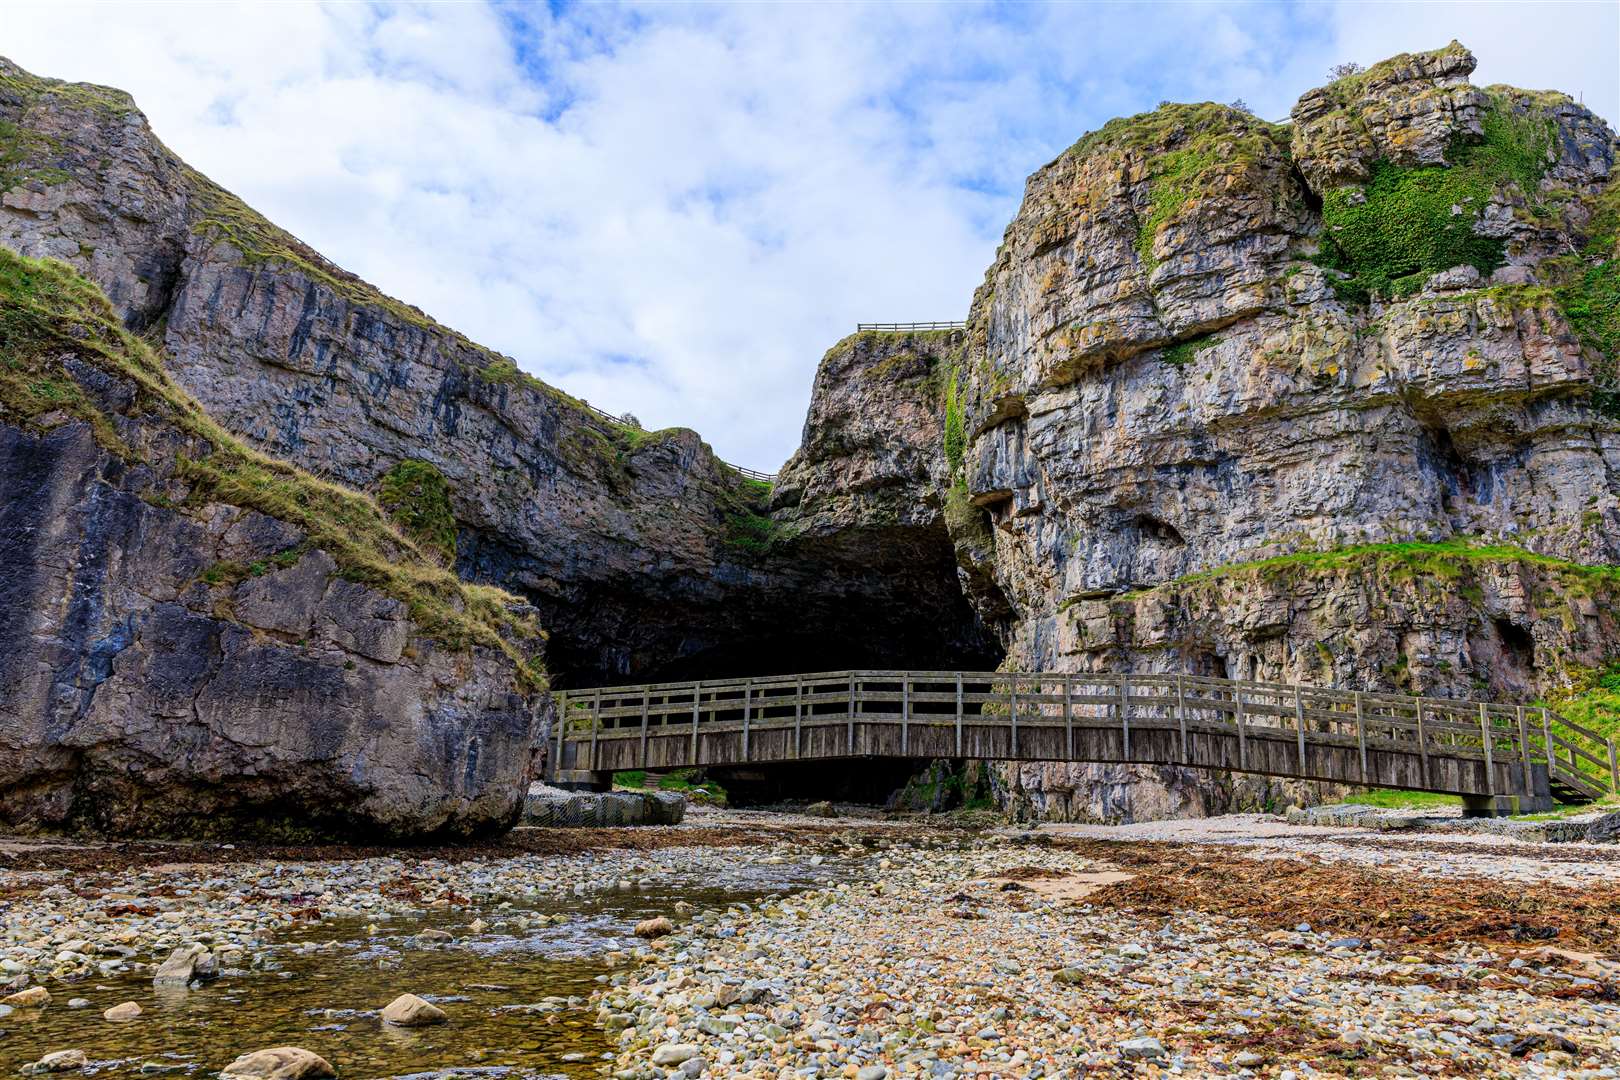 One of the projects listed in the plan aims to complete parking and toilet upgrades at Smoo Cave, a combined coastal and freshwater cave in Durness, Sutherland.